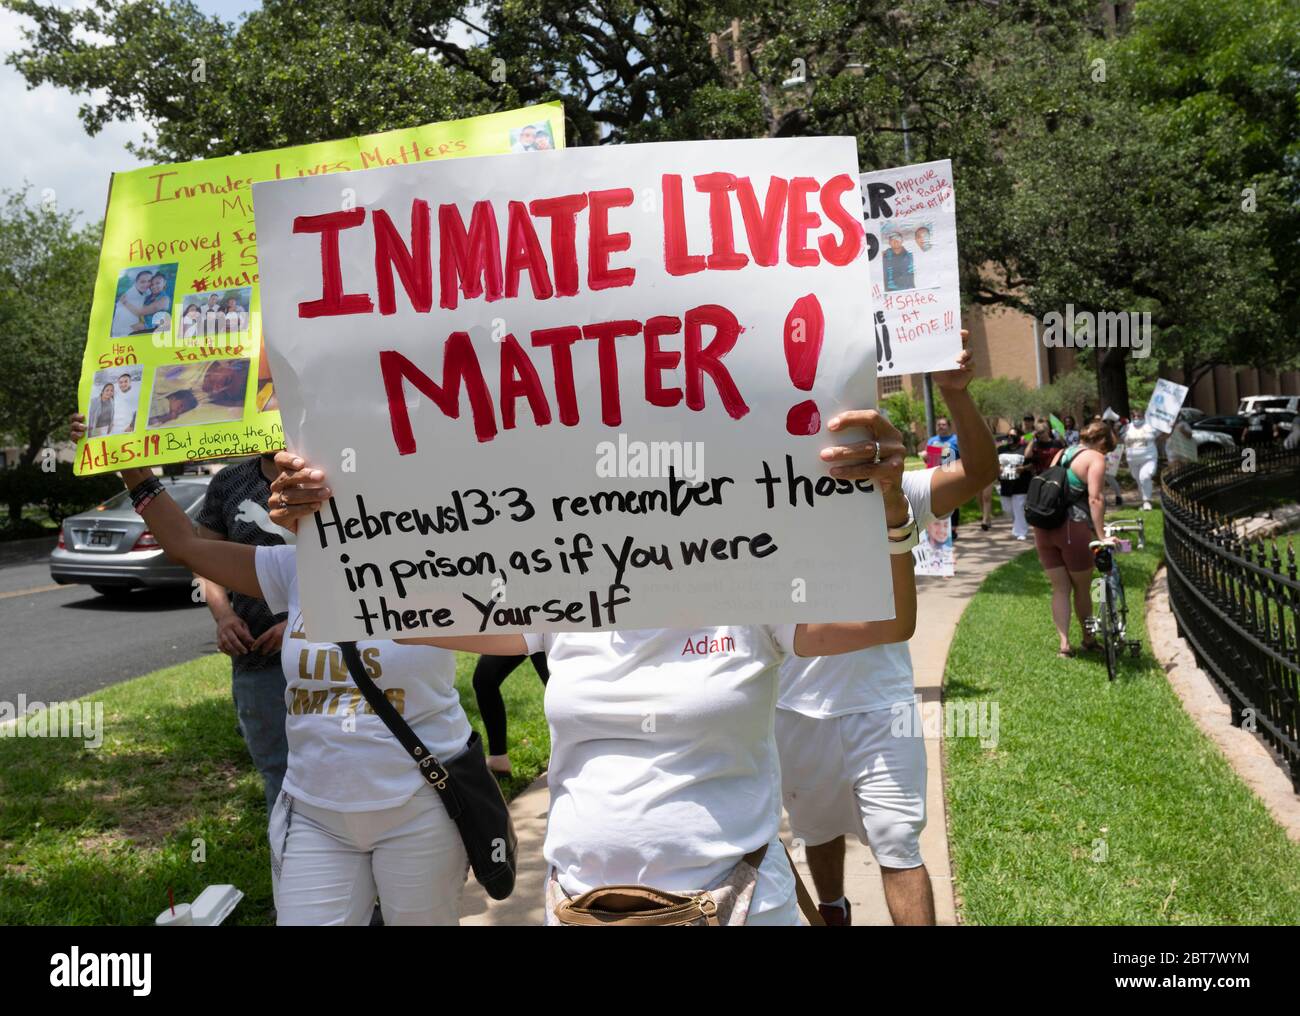 Austin, TX USA May 23, 2020: A coalition of Texas inmates rights groups rallies Saturday, May 23, 2020 at the Texas Governor's Mansion protesting the rapid spread of COVID-19 in prisons and the lack of protections for inmate during the pandemic. Hundreds of Texas inmates have tested positive and social distancing is impossible, critics say. Credit: Bob Daemmrich/Alamy Live News Stock Photo